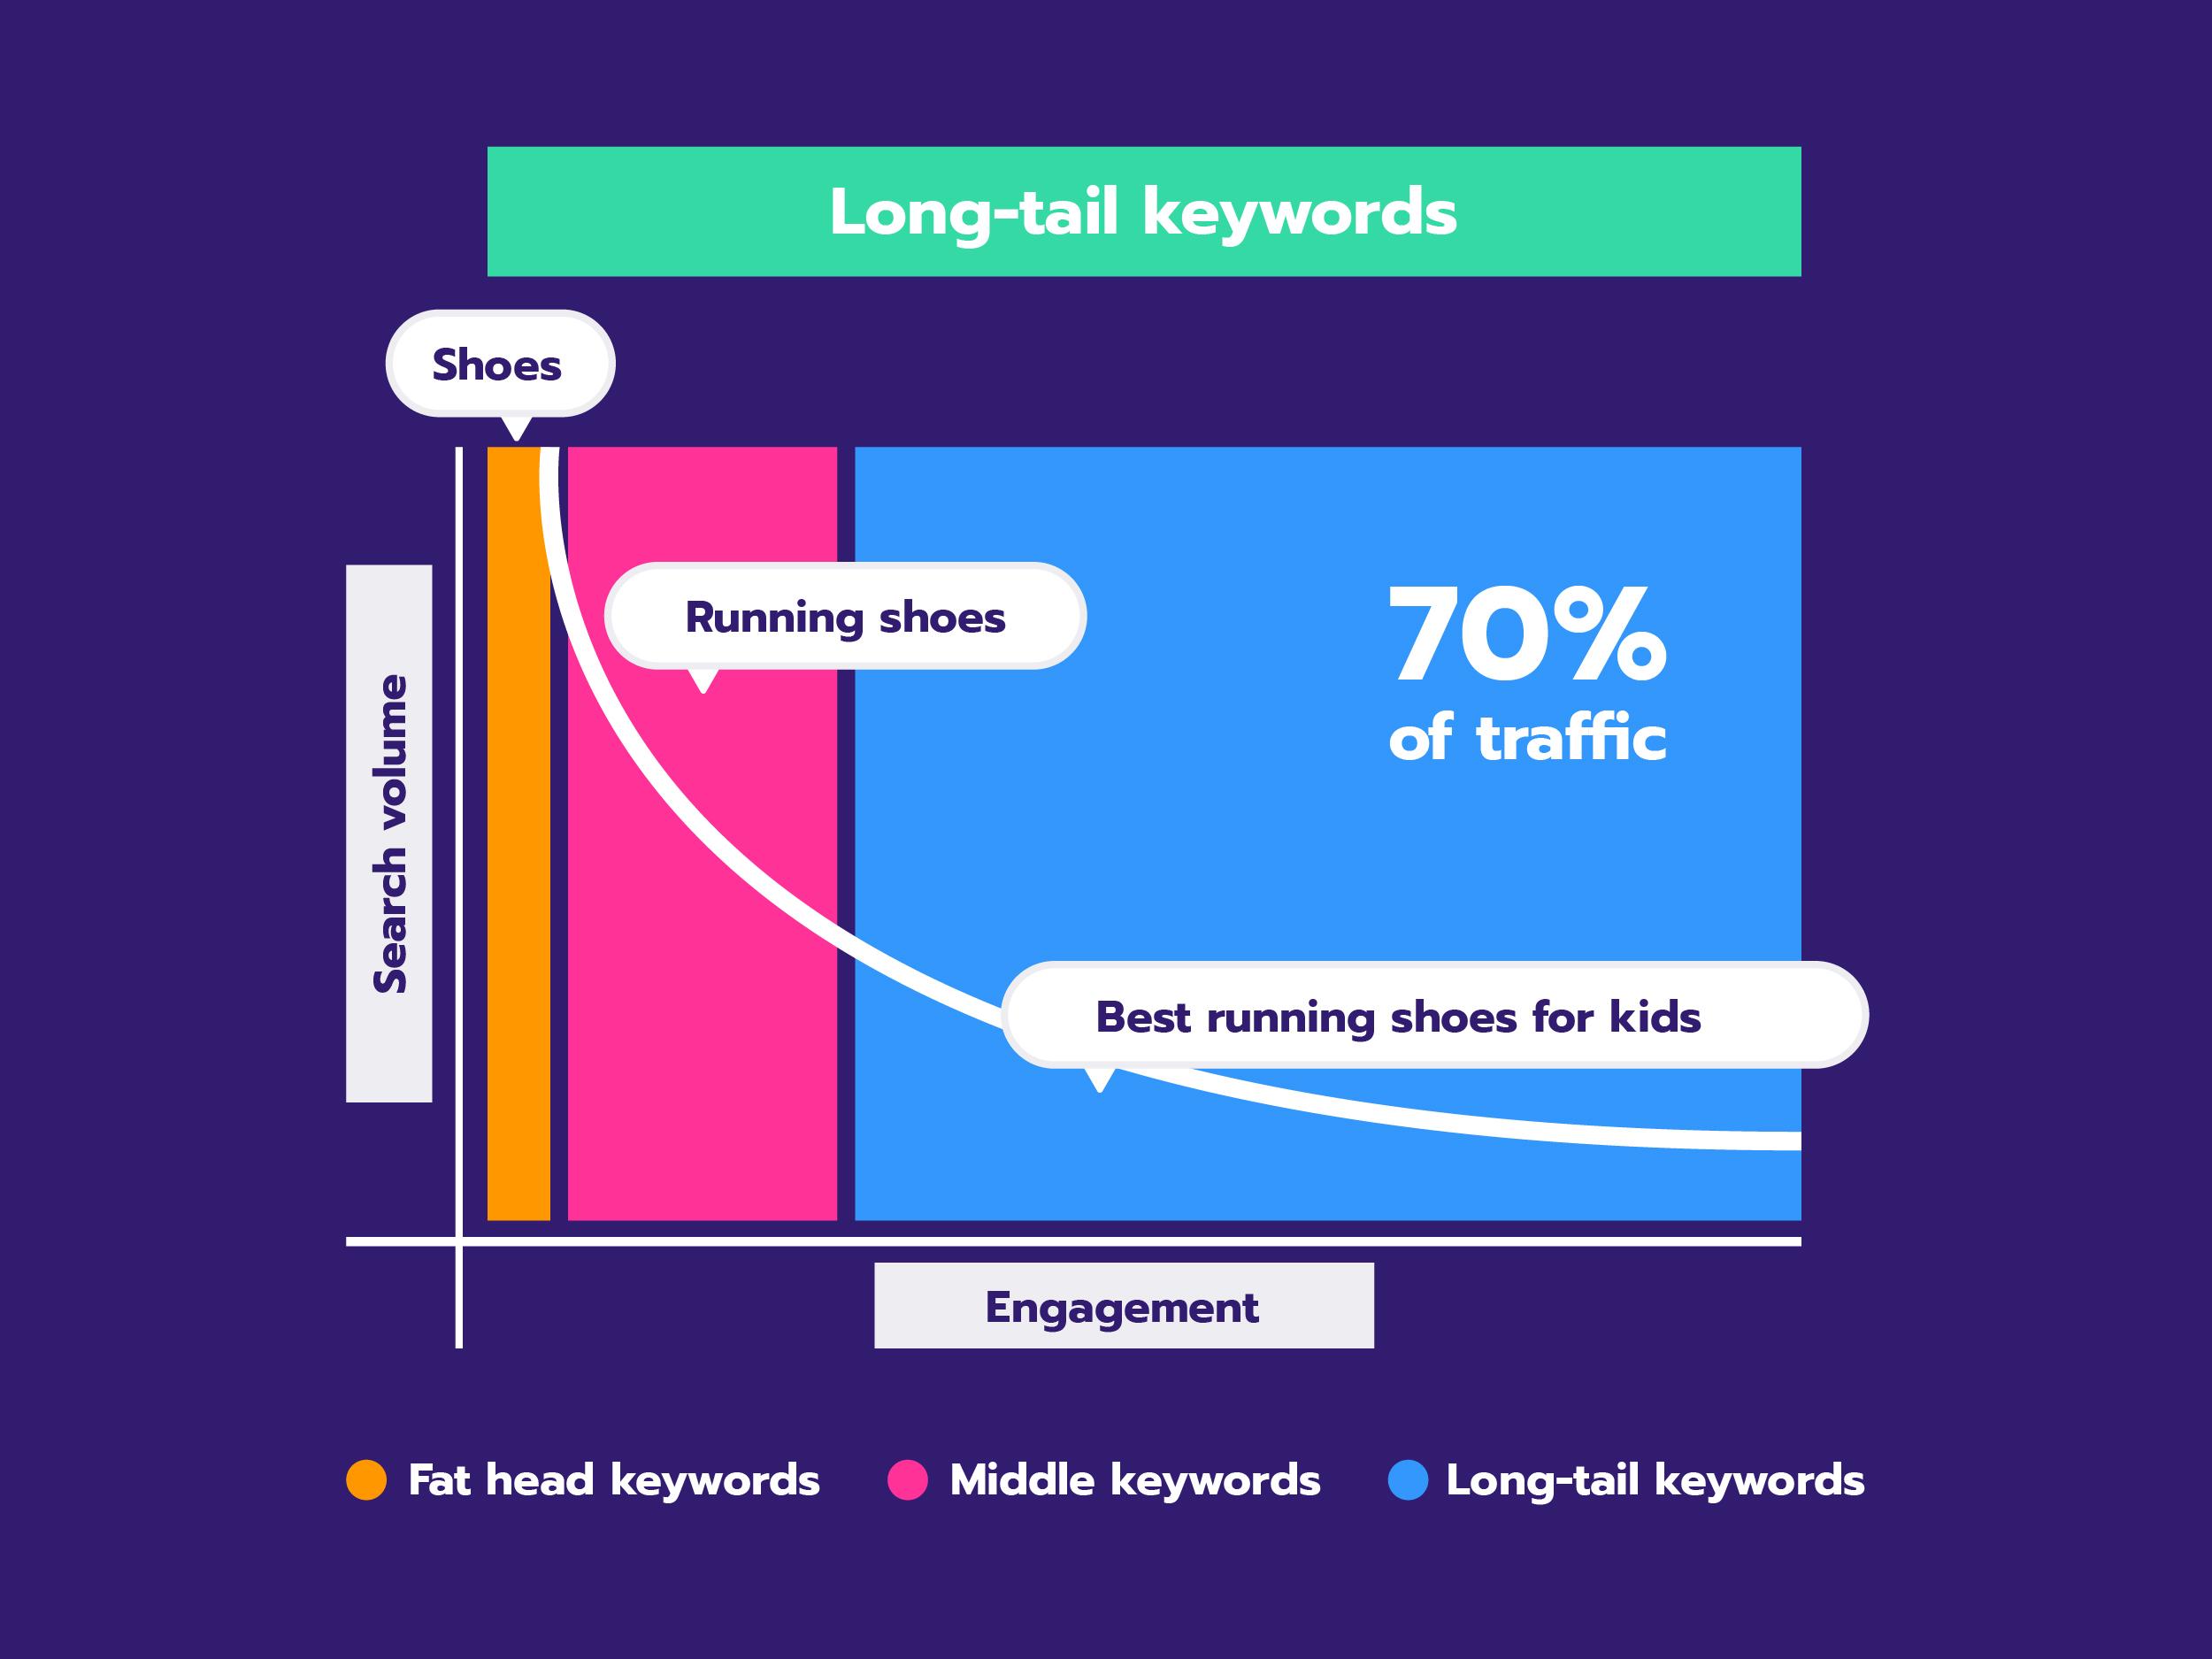 Longtail keywords consist of multiple words, have less search volume but more engagement